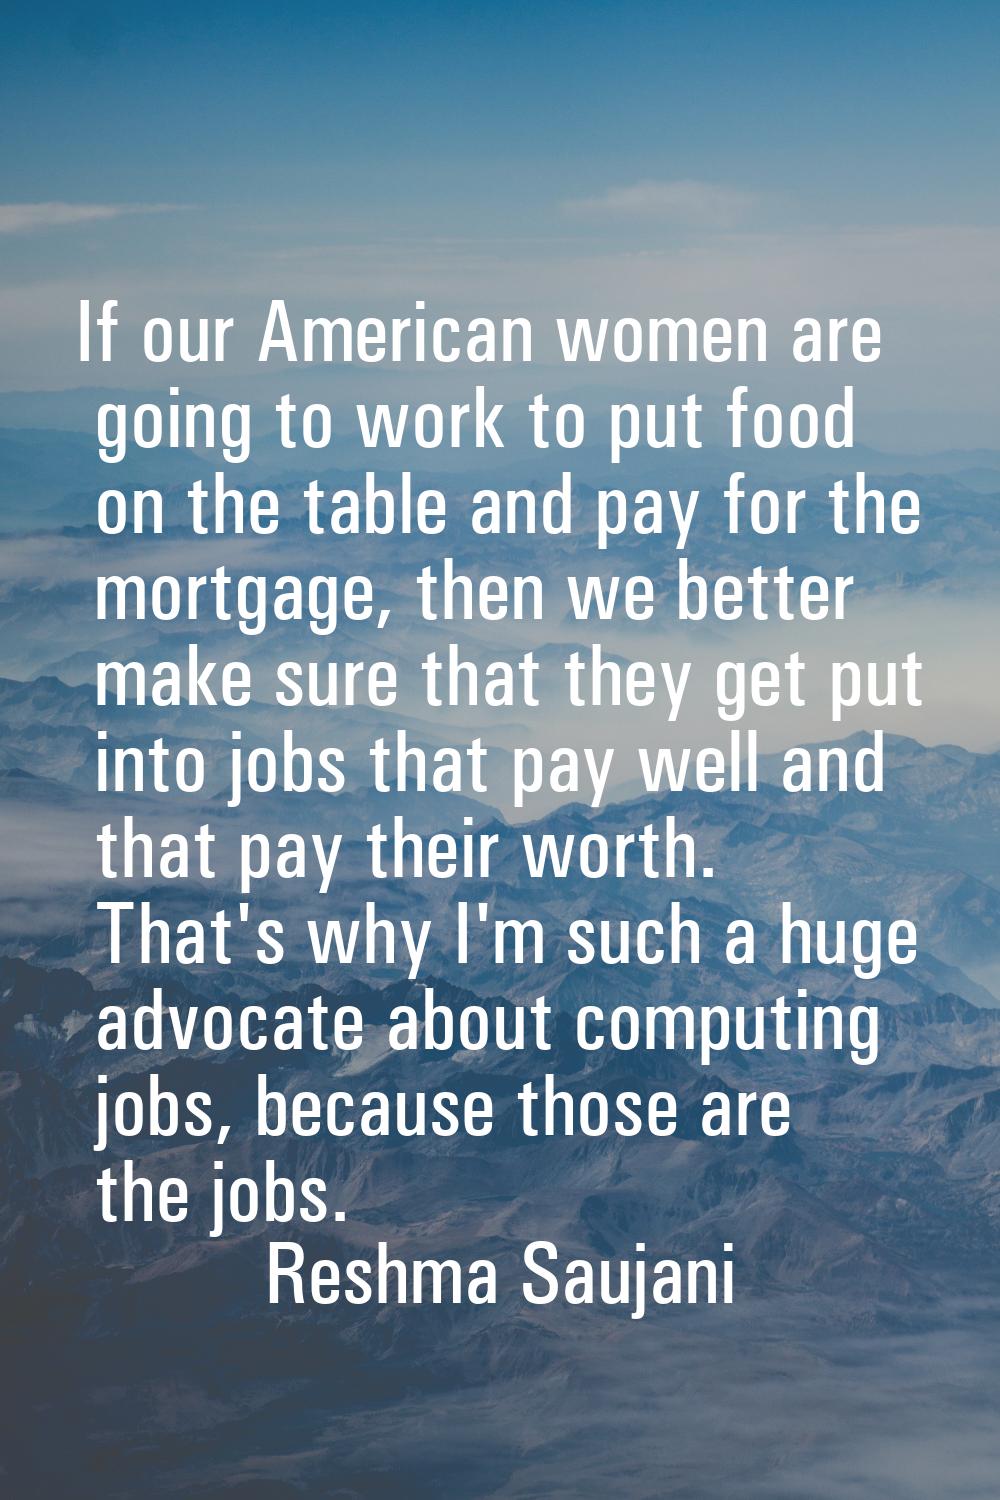 If our American women are going to work to put food on the table and pay for the mortgage, then we 